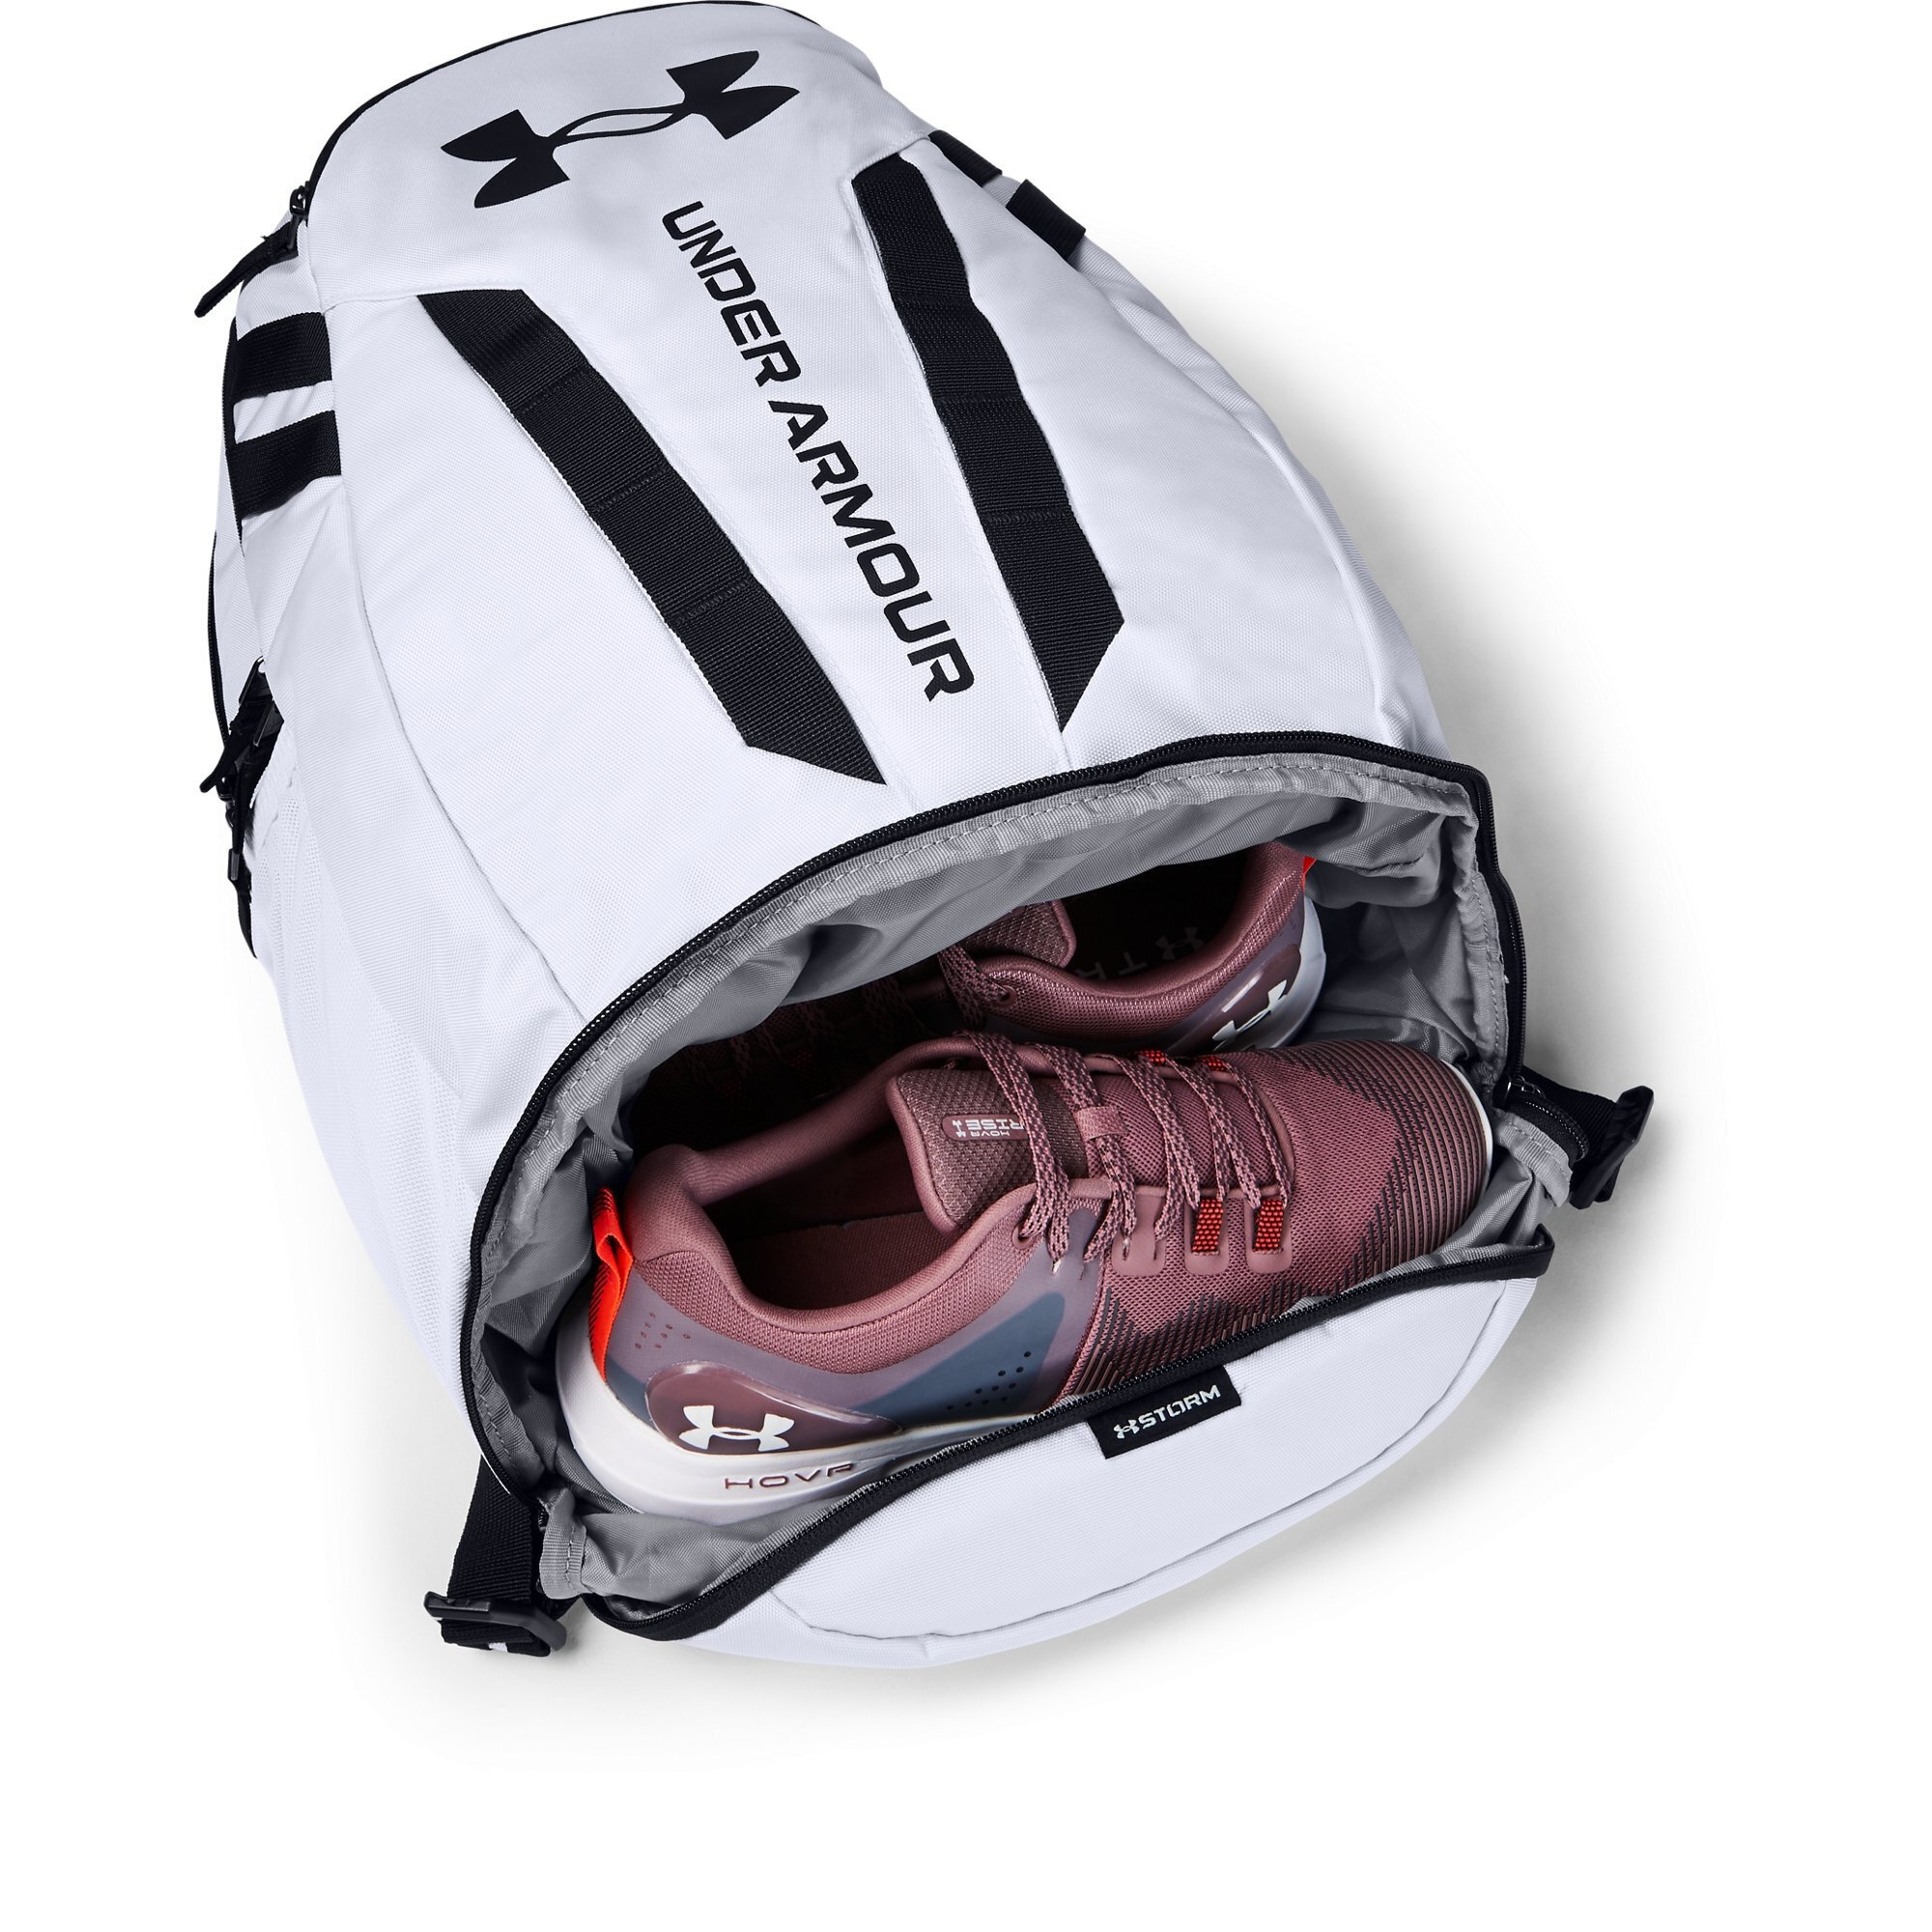 Under Armour Hustle Backpack, White - image 5 of 5